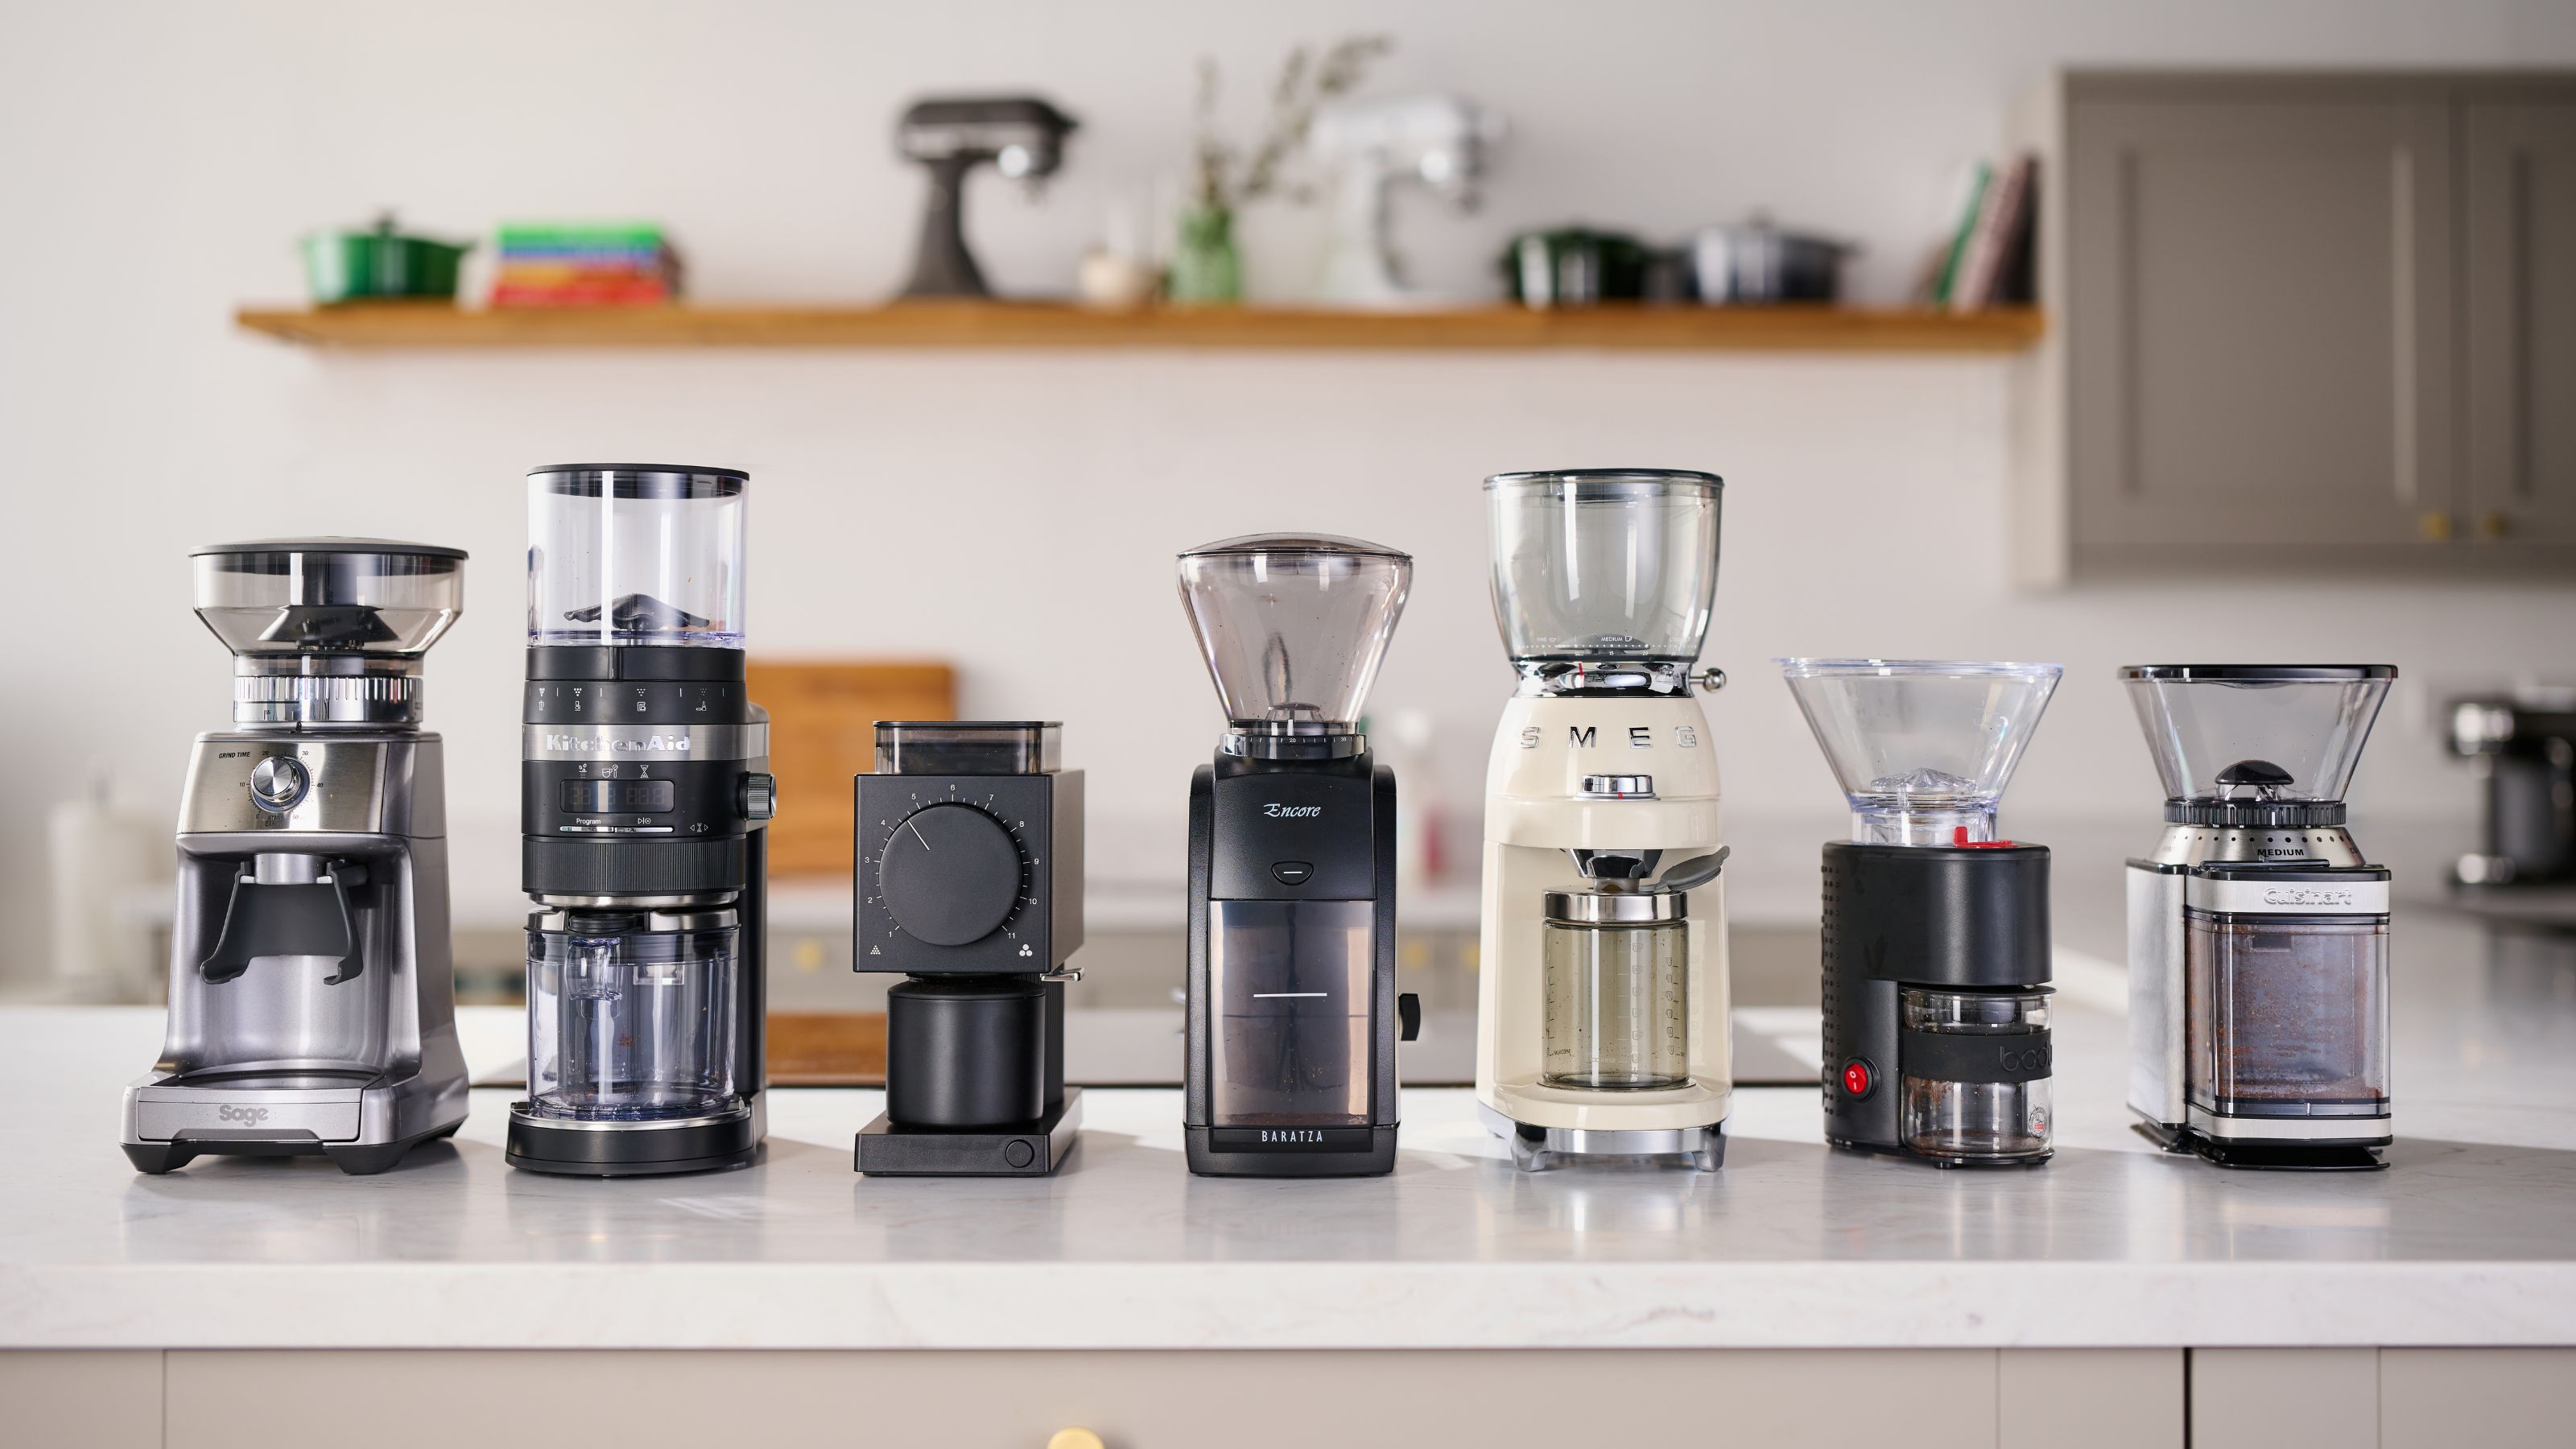 Best coffee grinder 2024: tested for perfect coffee